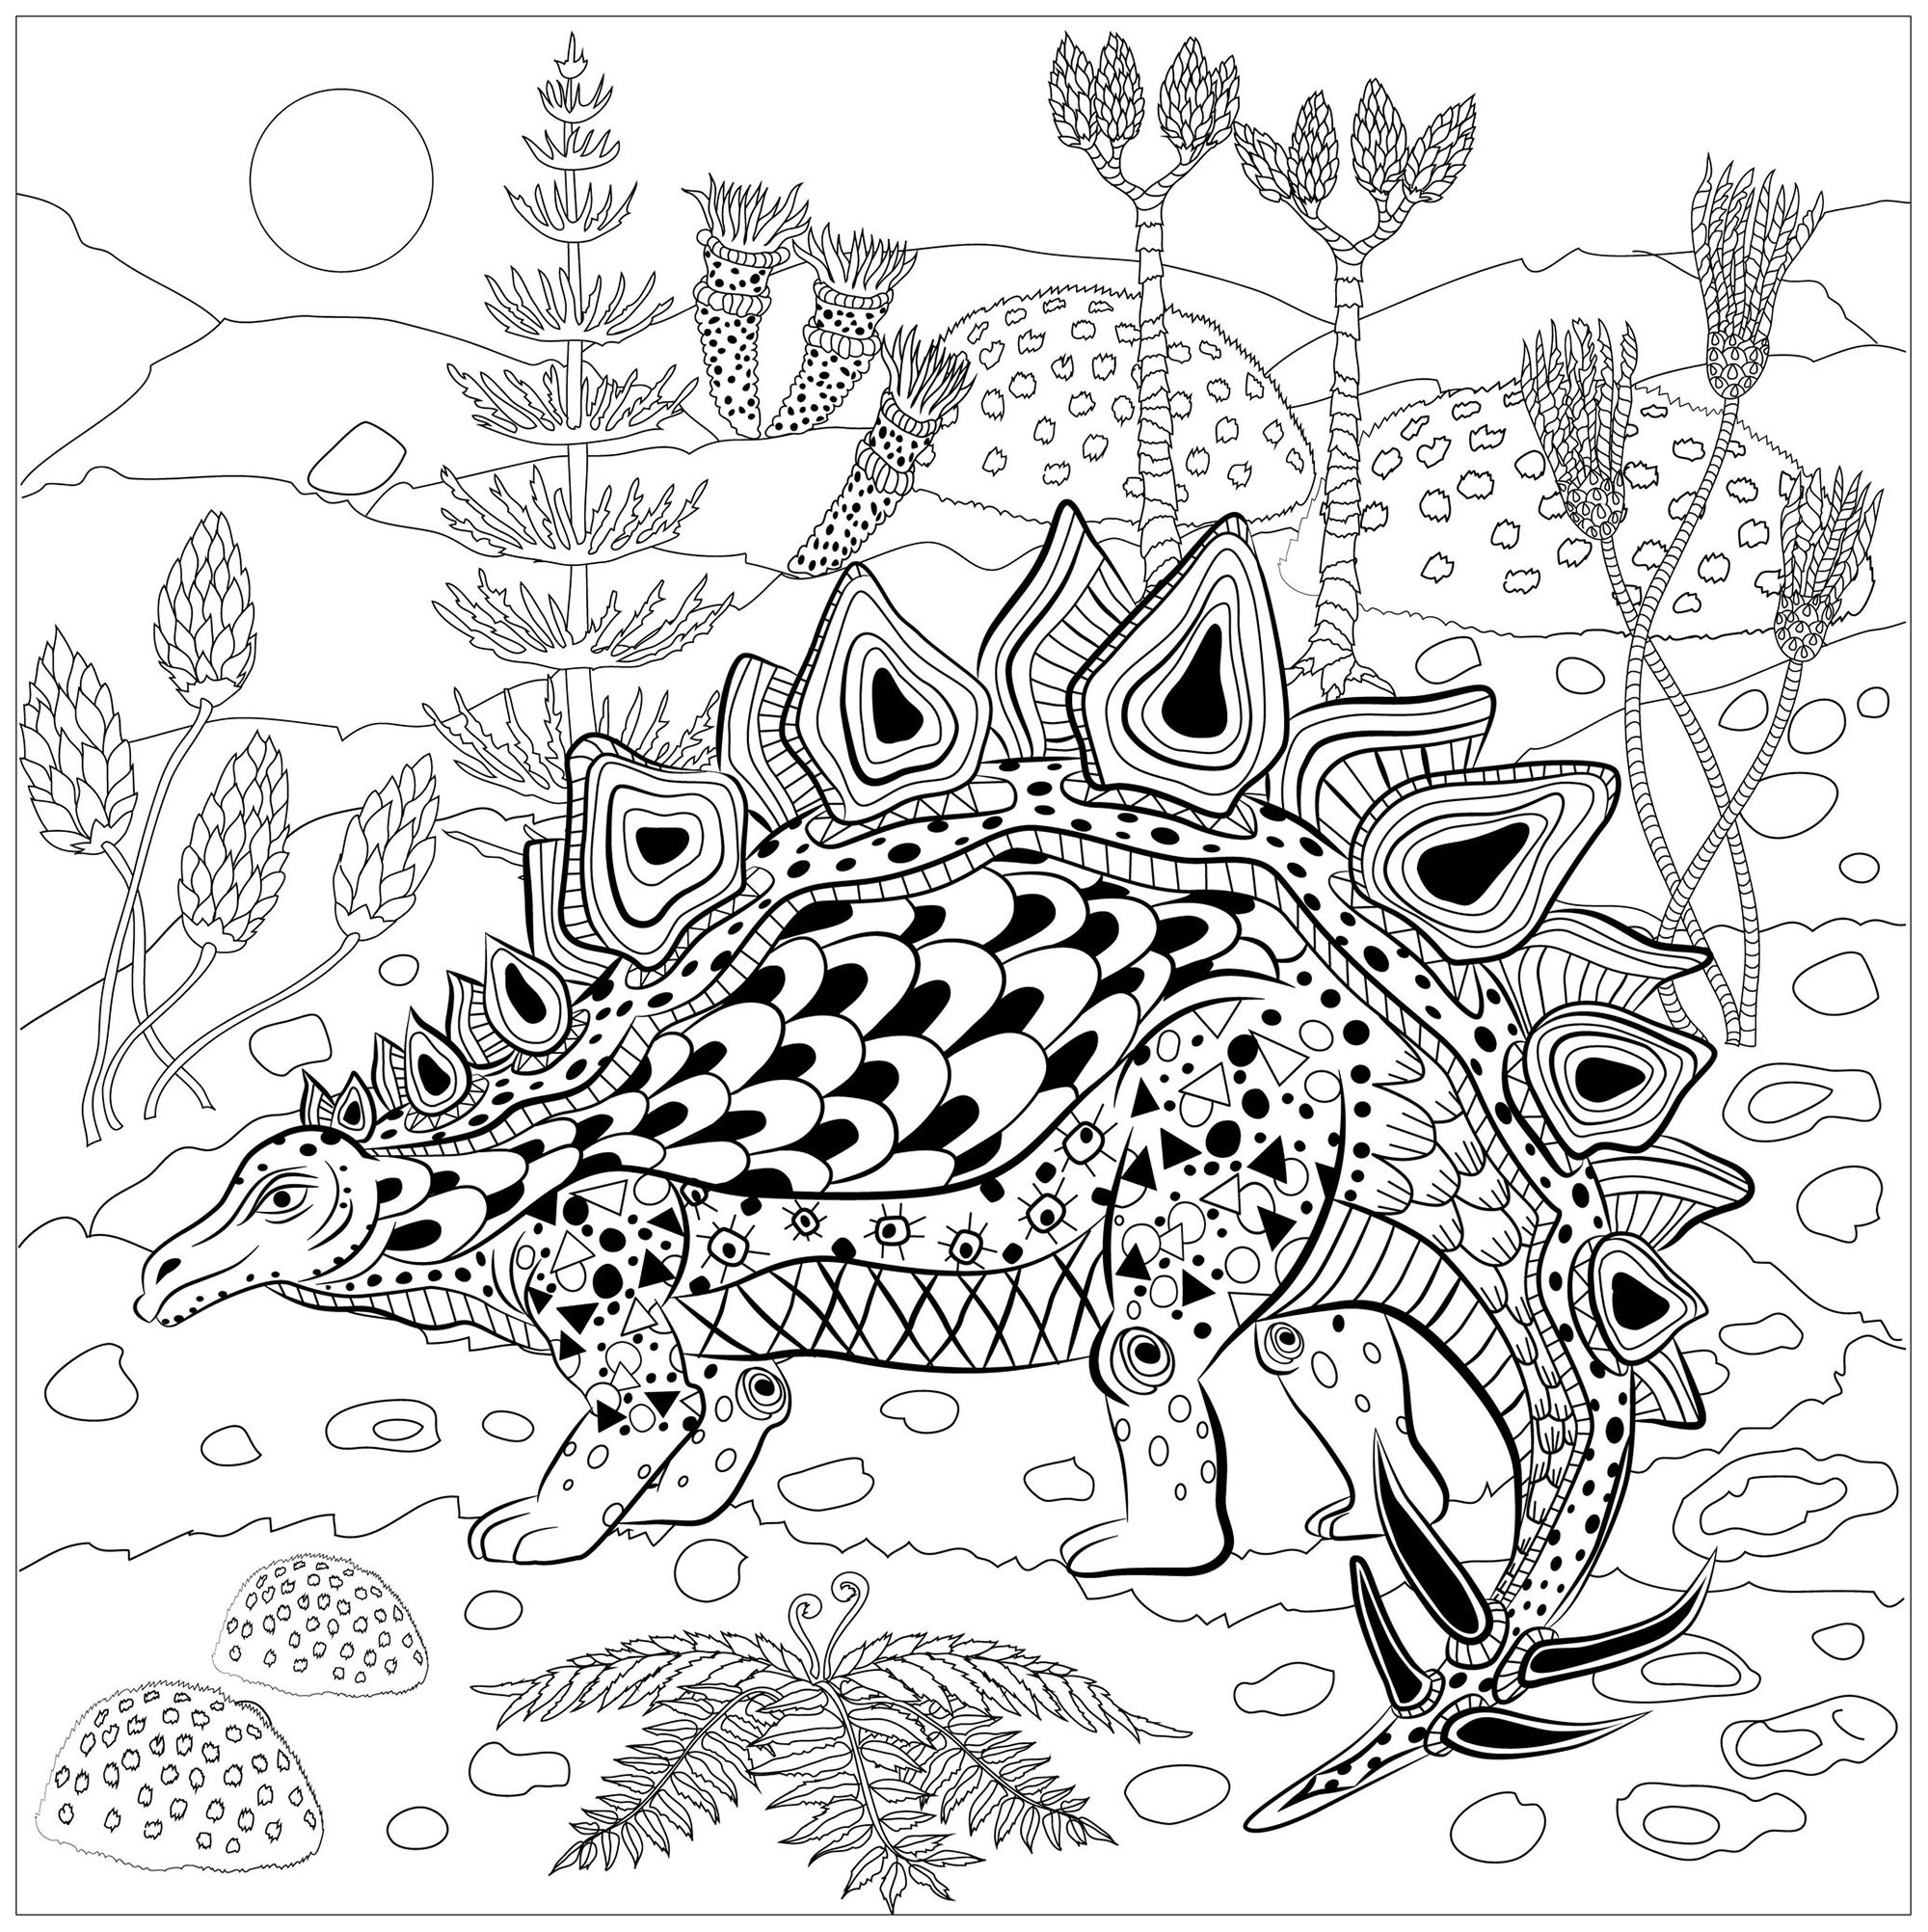 Stegosaurus In Nature Dinosaurs Adult Coloring Pages